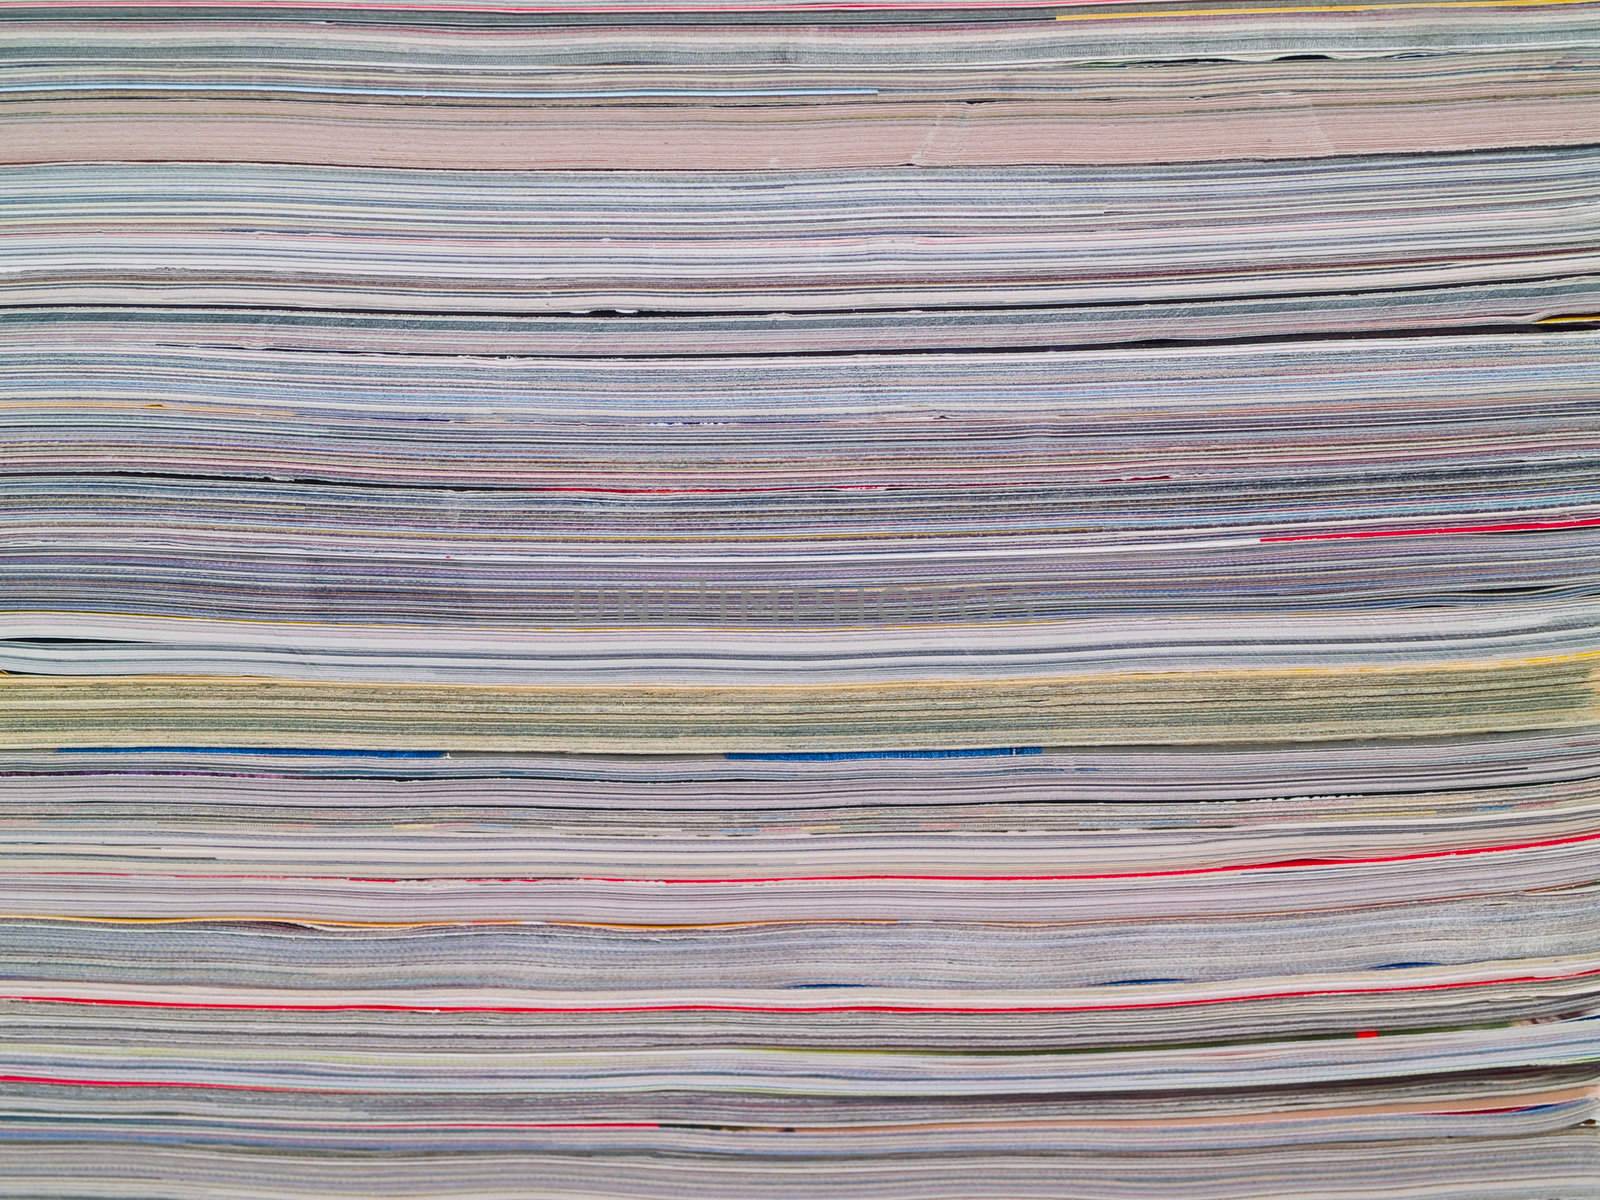 A stack of magazines filling the frame from top to bottom